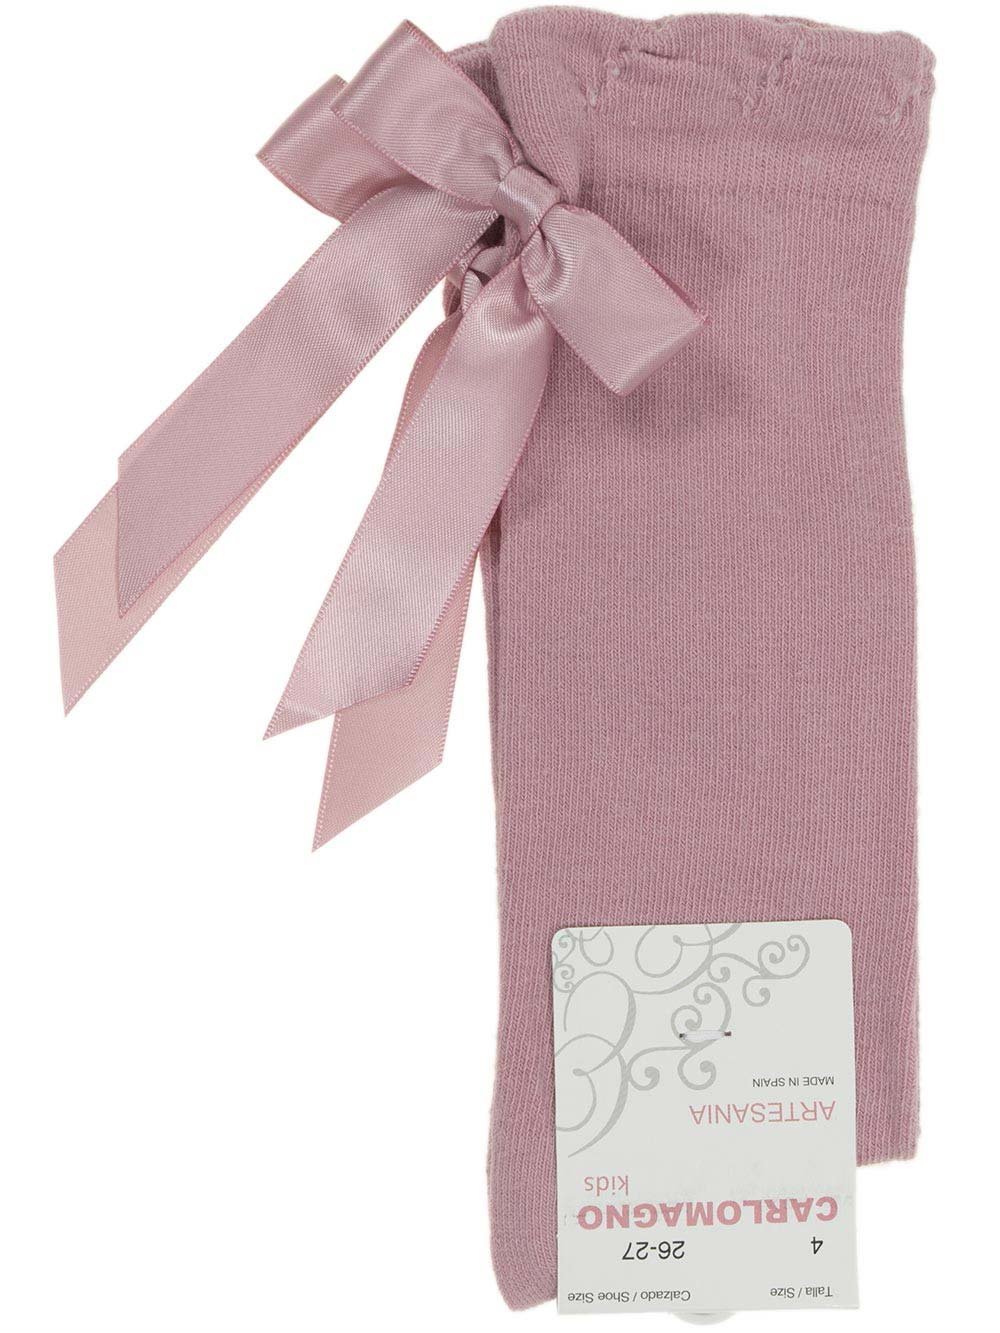 Cotton Knee High Socks With Bow In Back - Mauve Pink